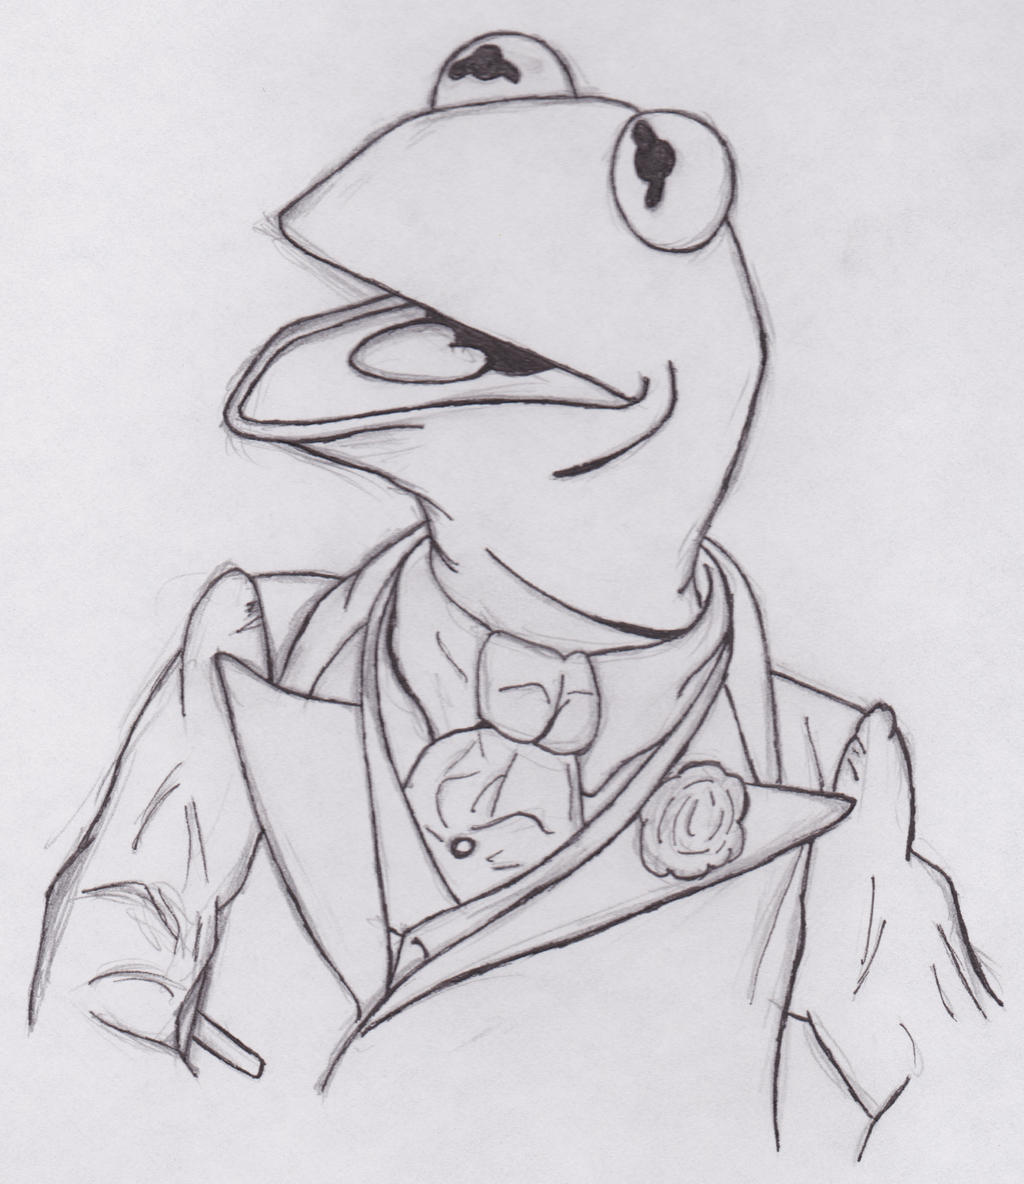 Kermit in a tux by magictoast on